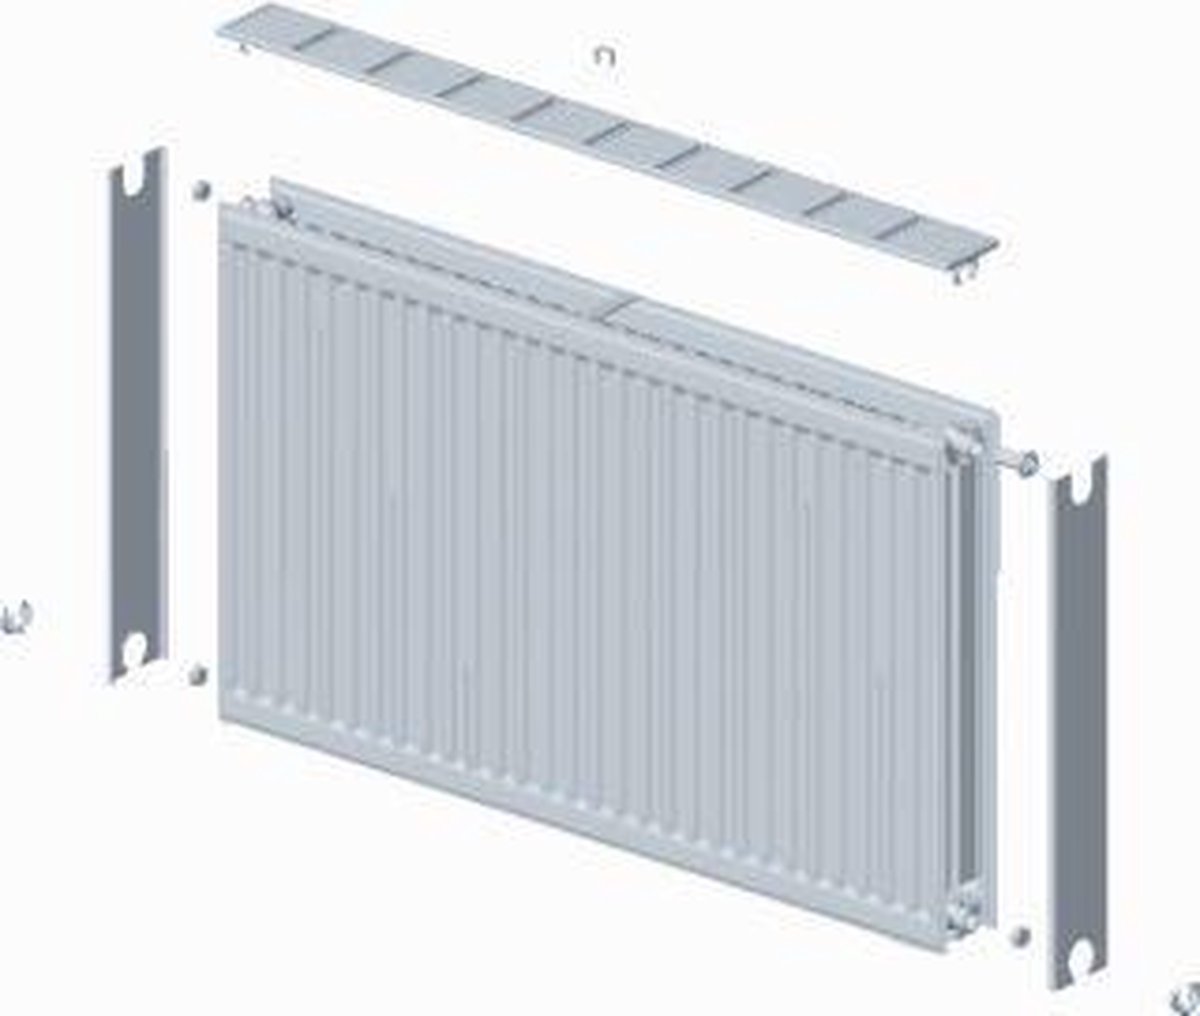 Stelrad paneelradiator Novello, staal, wit, (hxlxd) 500x1400x100mm, 22